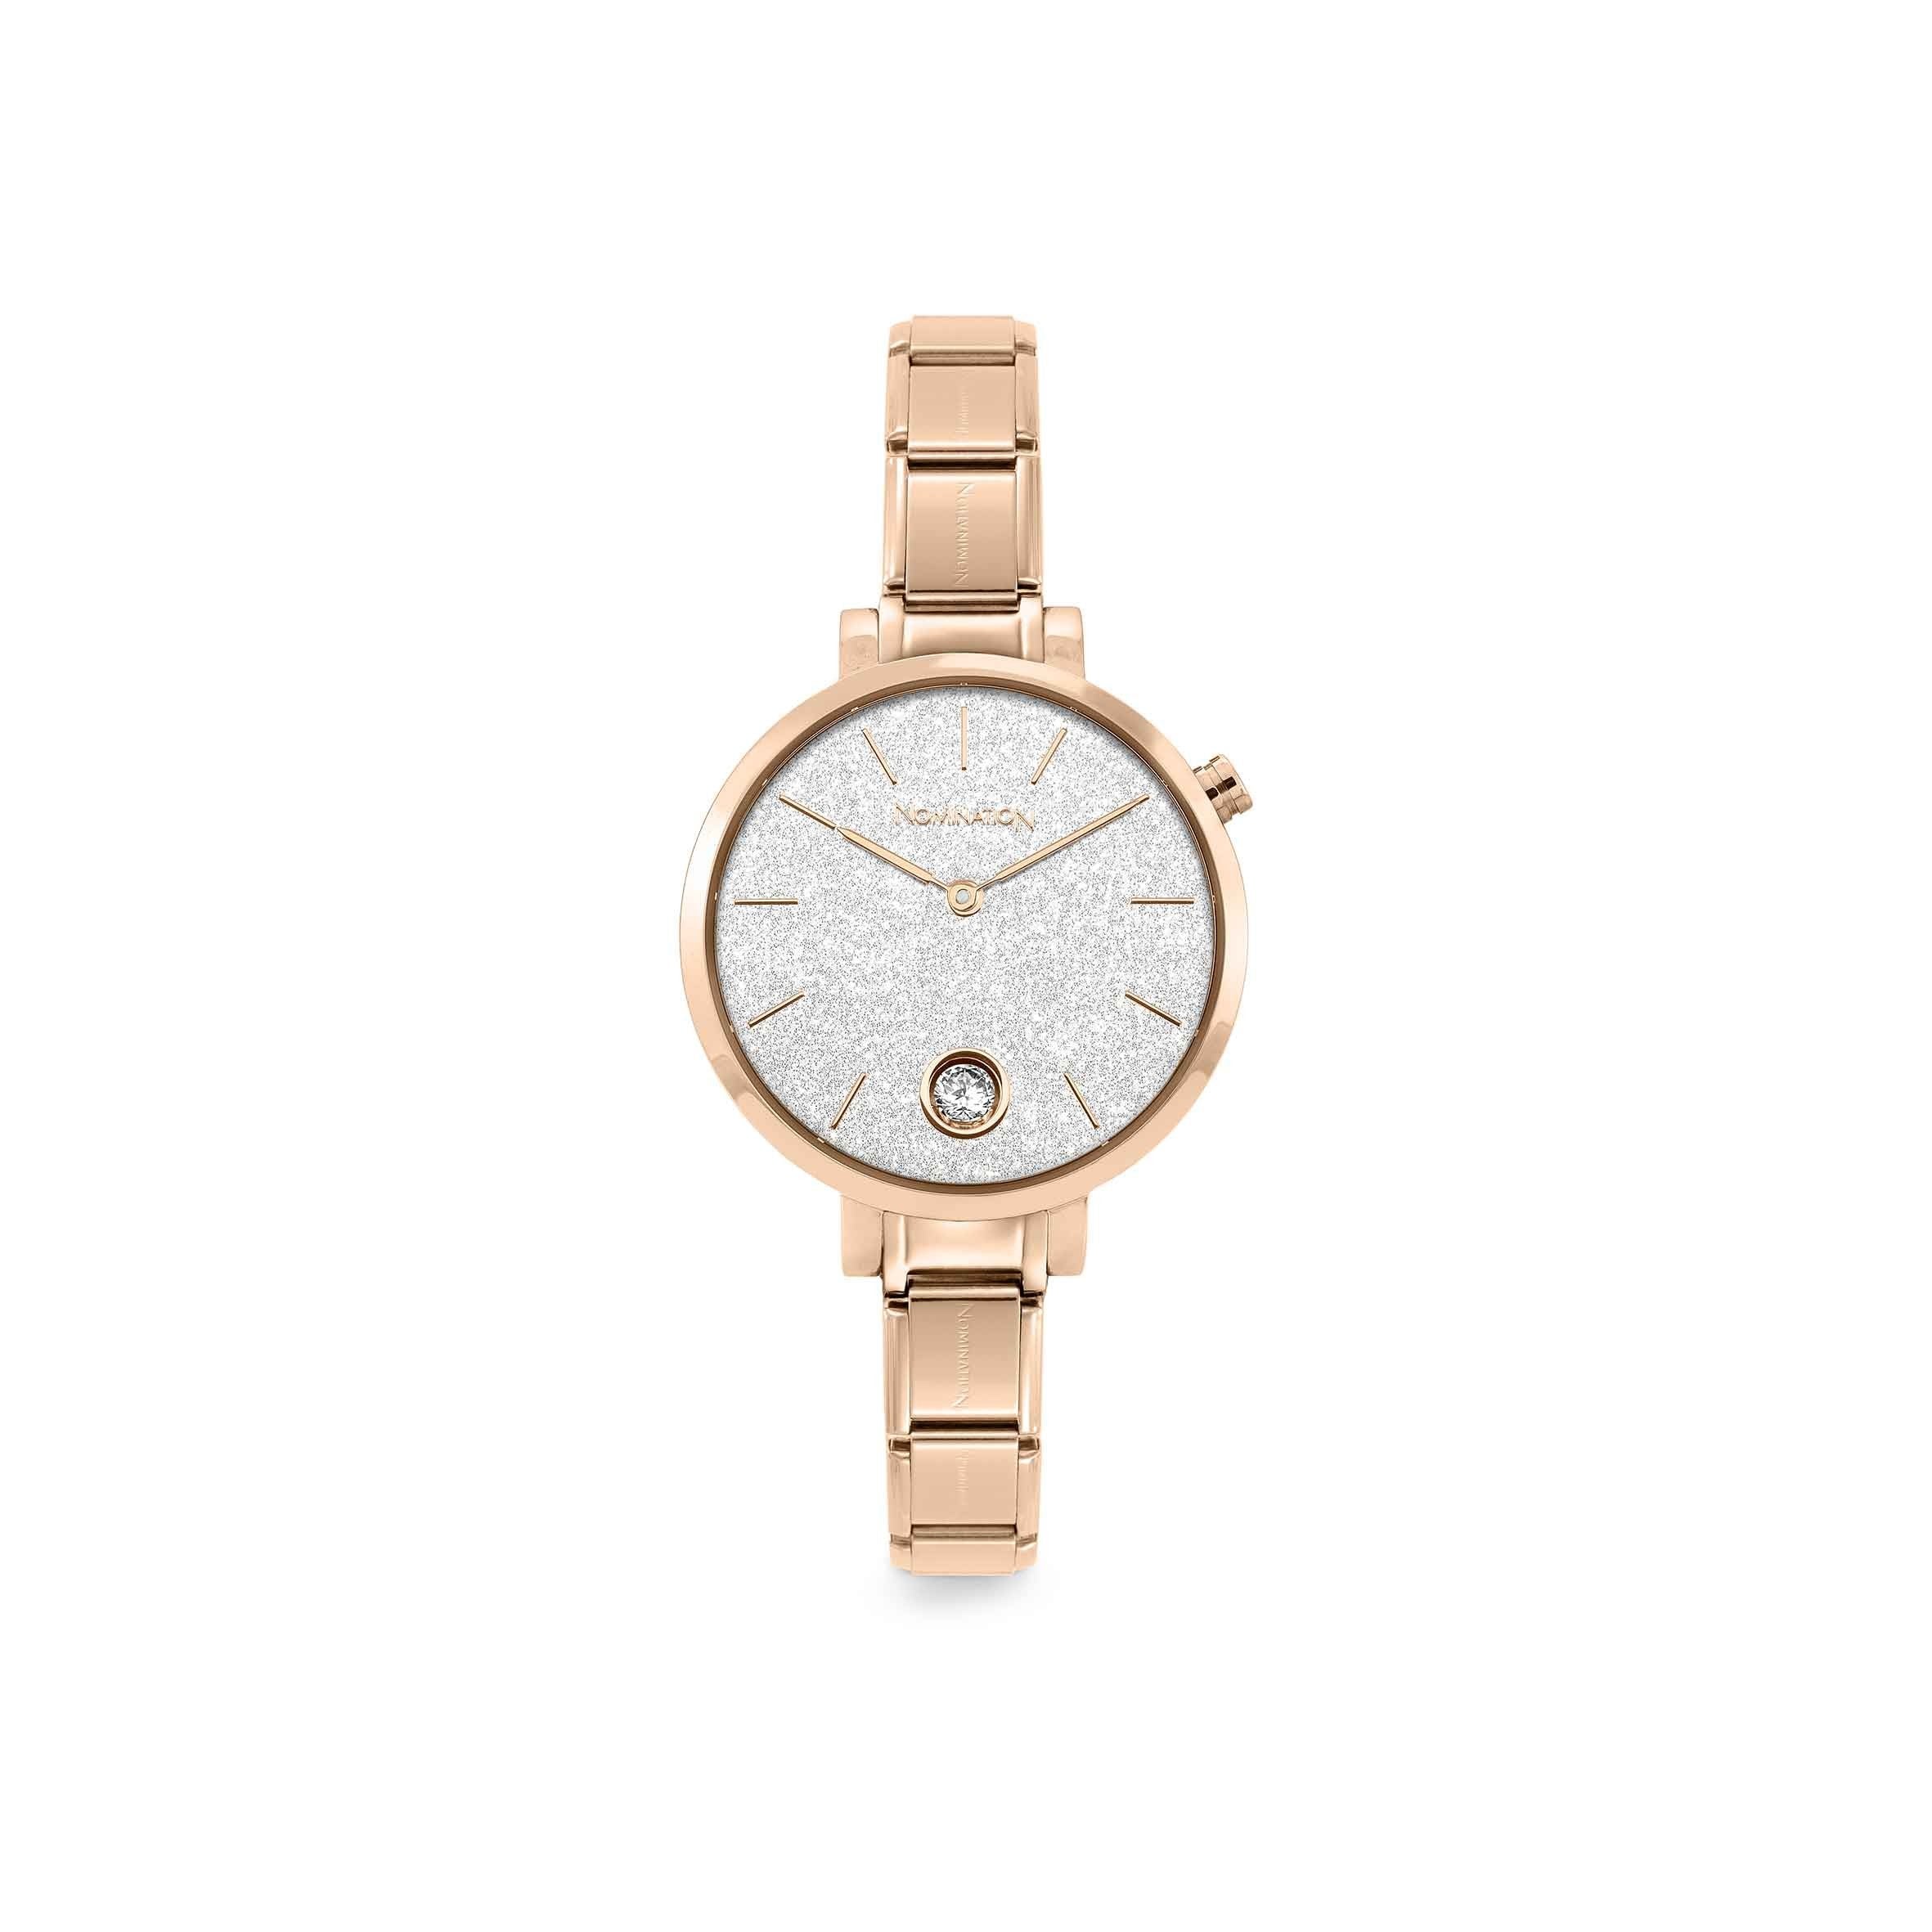 Nomination Paris Rose Gold PVD Watch with Silver Glitter